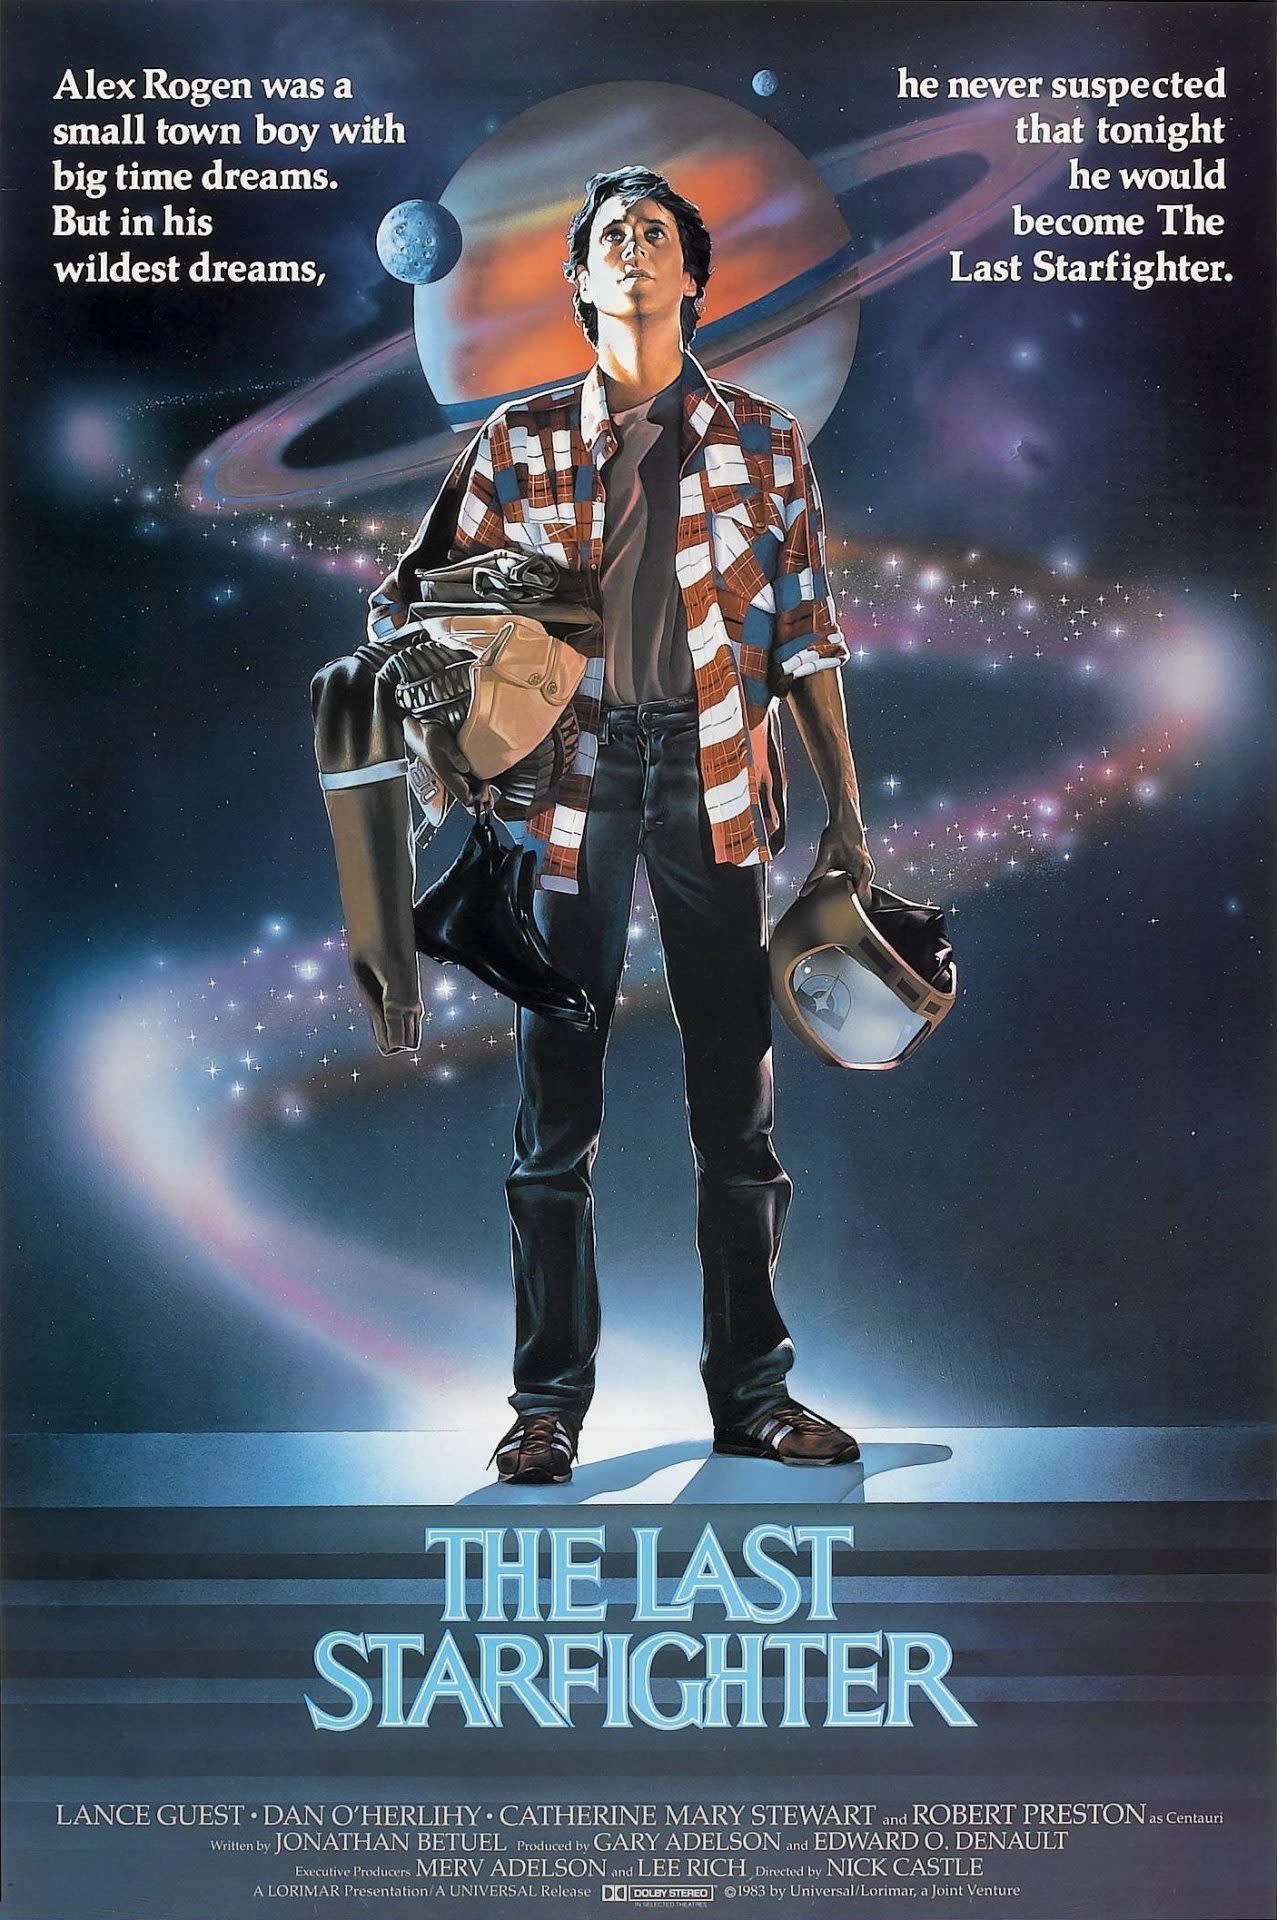 THE LAST STARFIGHTER Sequel Gets a Concept Art Sizzle Reel